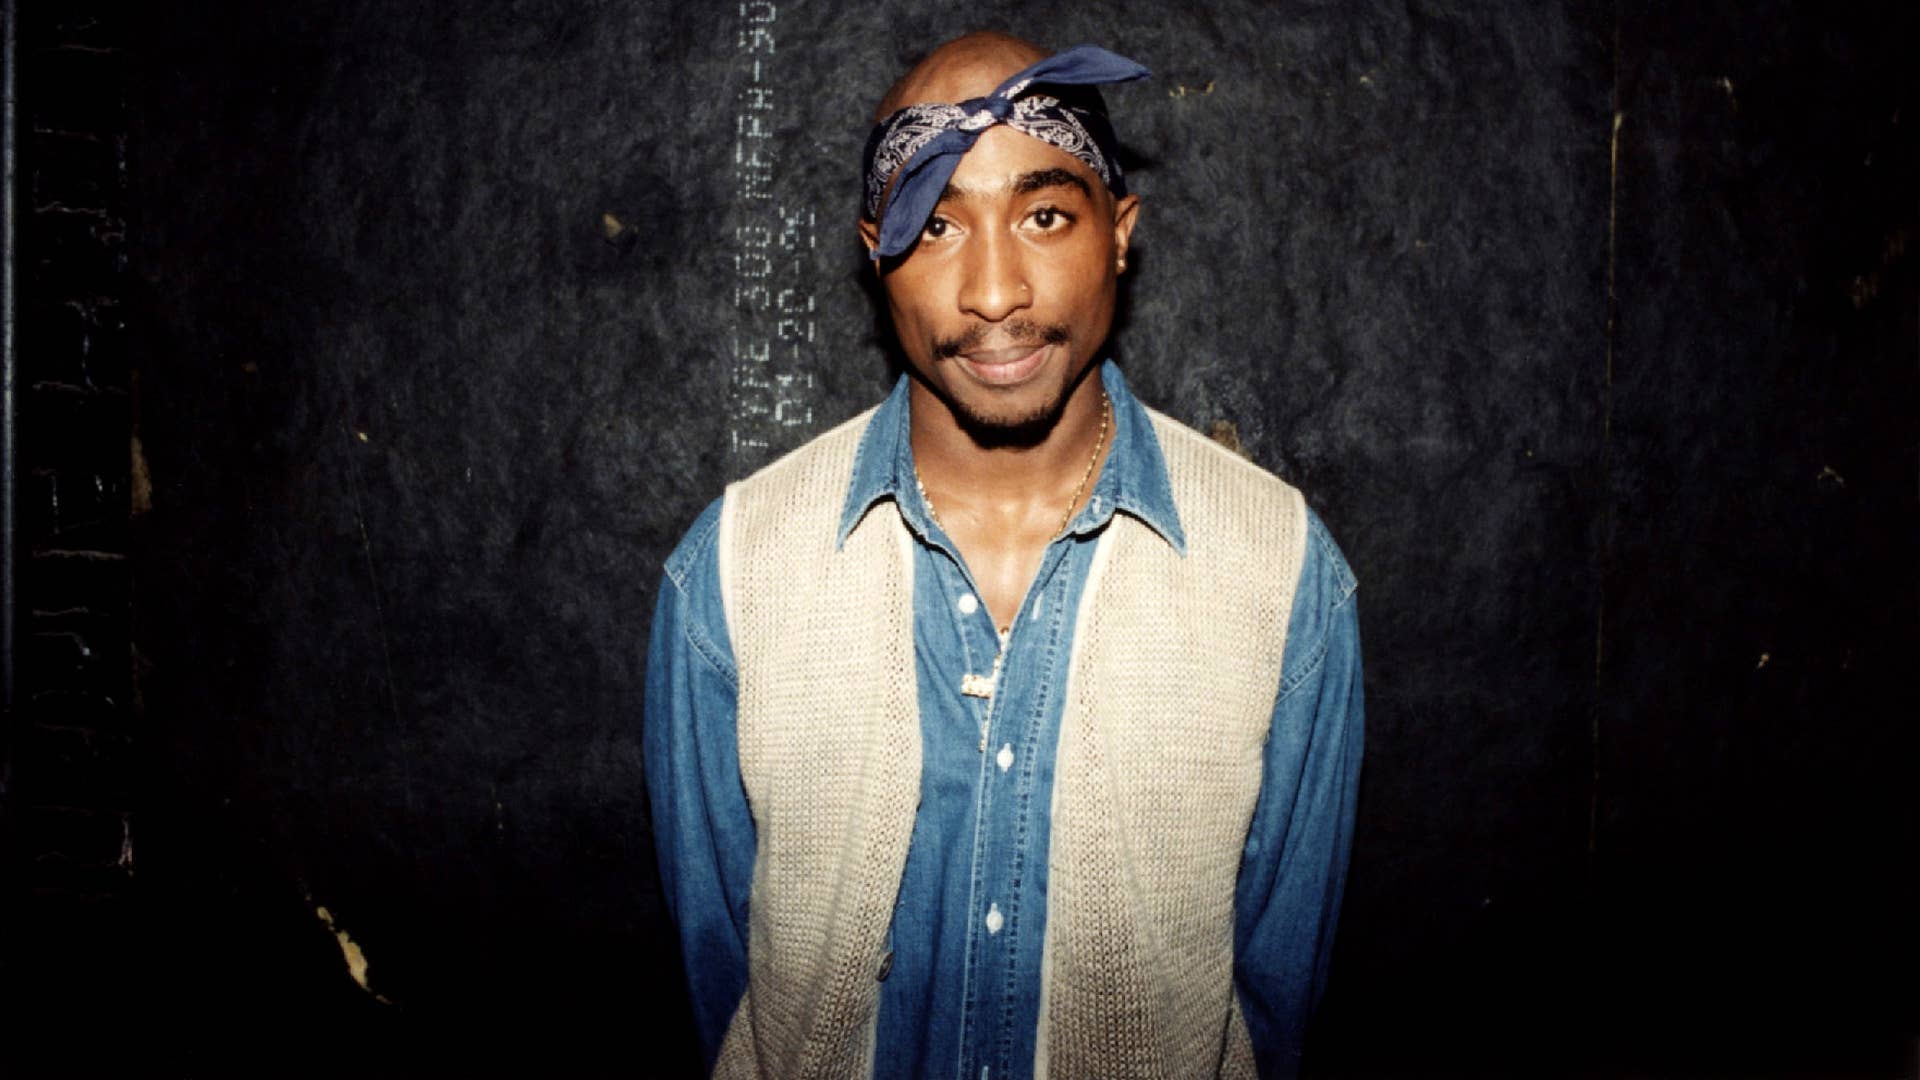 Tupac Shakur poses for photo backstage following performance.